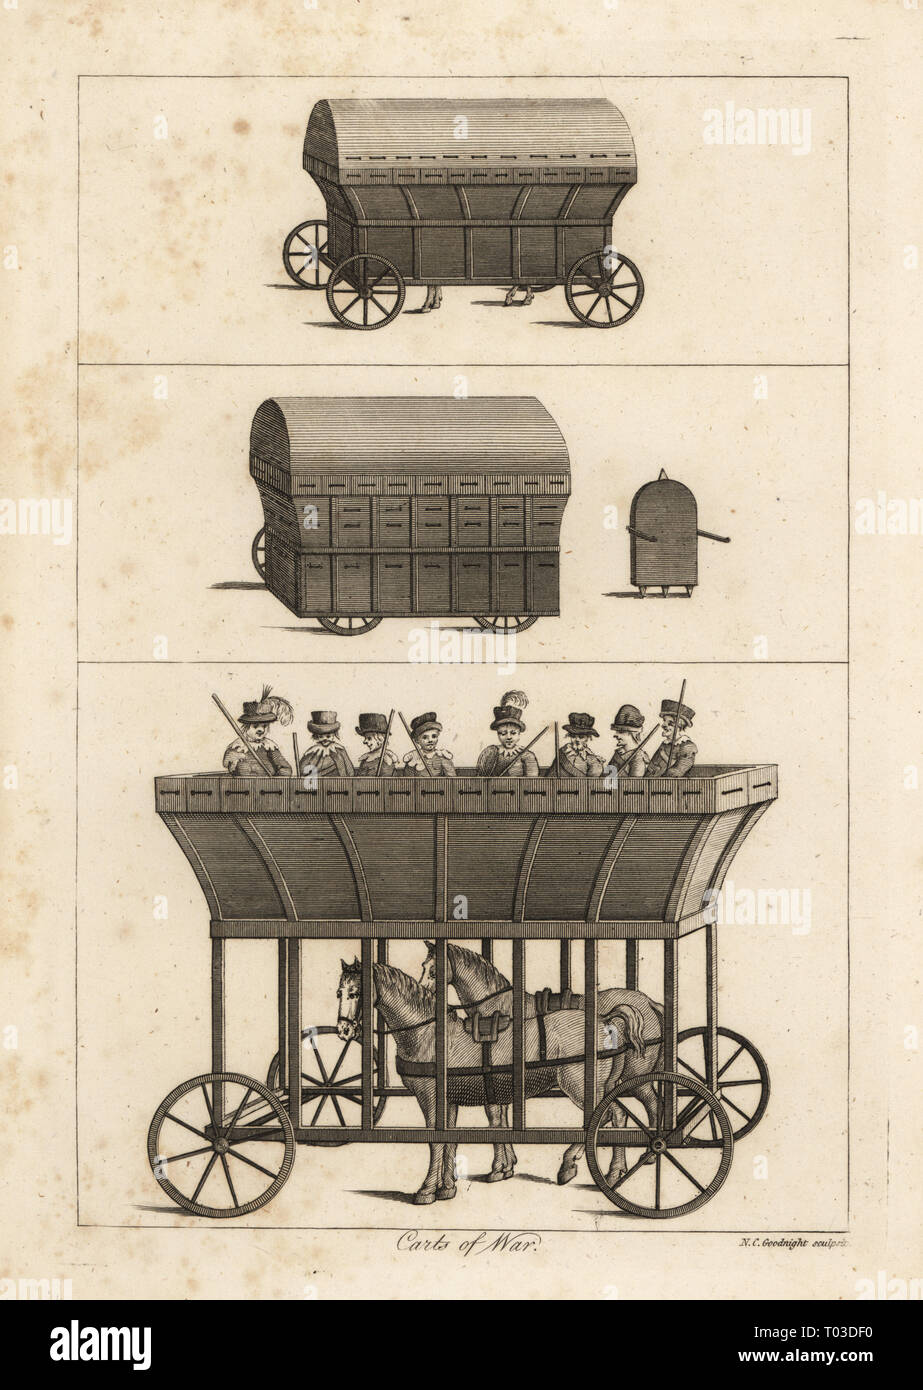 Covered carts of war pierced with loopholes and carrying musketeers. Bottom figure with covers removed to reveal musketeers and horses below. Copperplate engraving by N.C. Goodnight from Francis Grose's Military Antiquities respecting a History of the English Army, Stockdale, London, 1812. Stock Photo